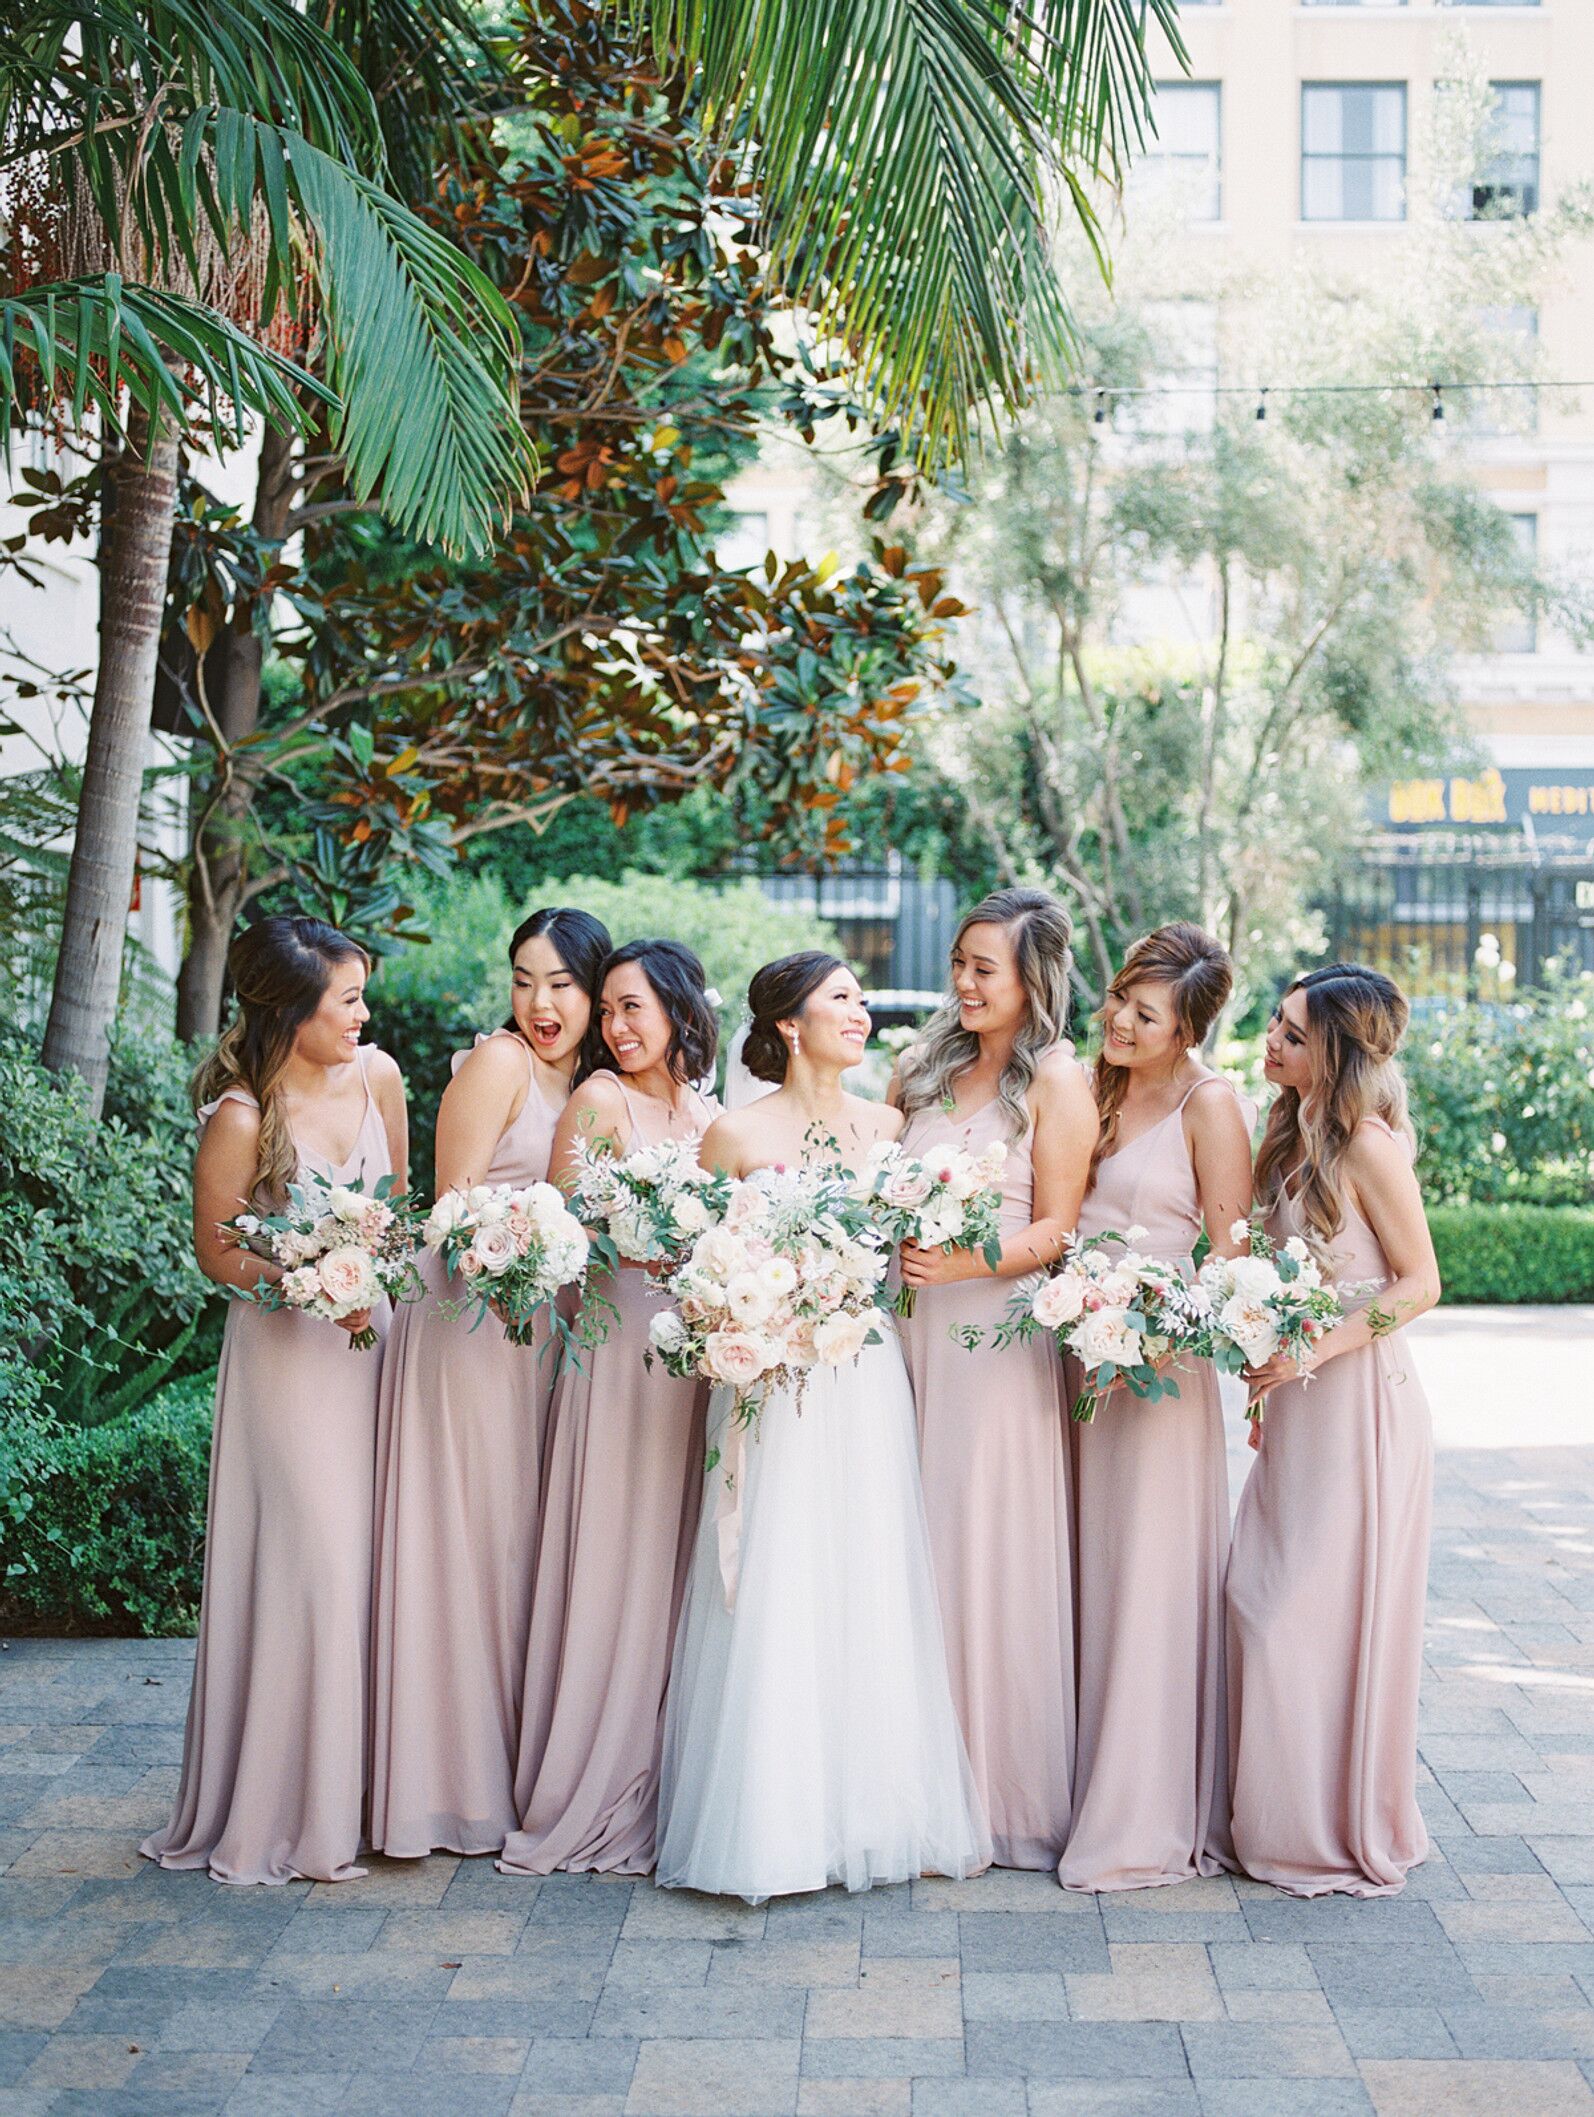 This Wedding at Vibiana in Los Angeles Will Have You Dreaming of a ...